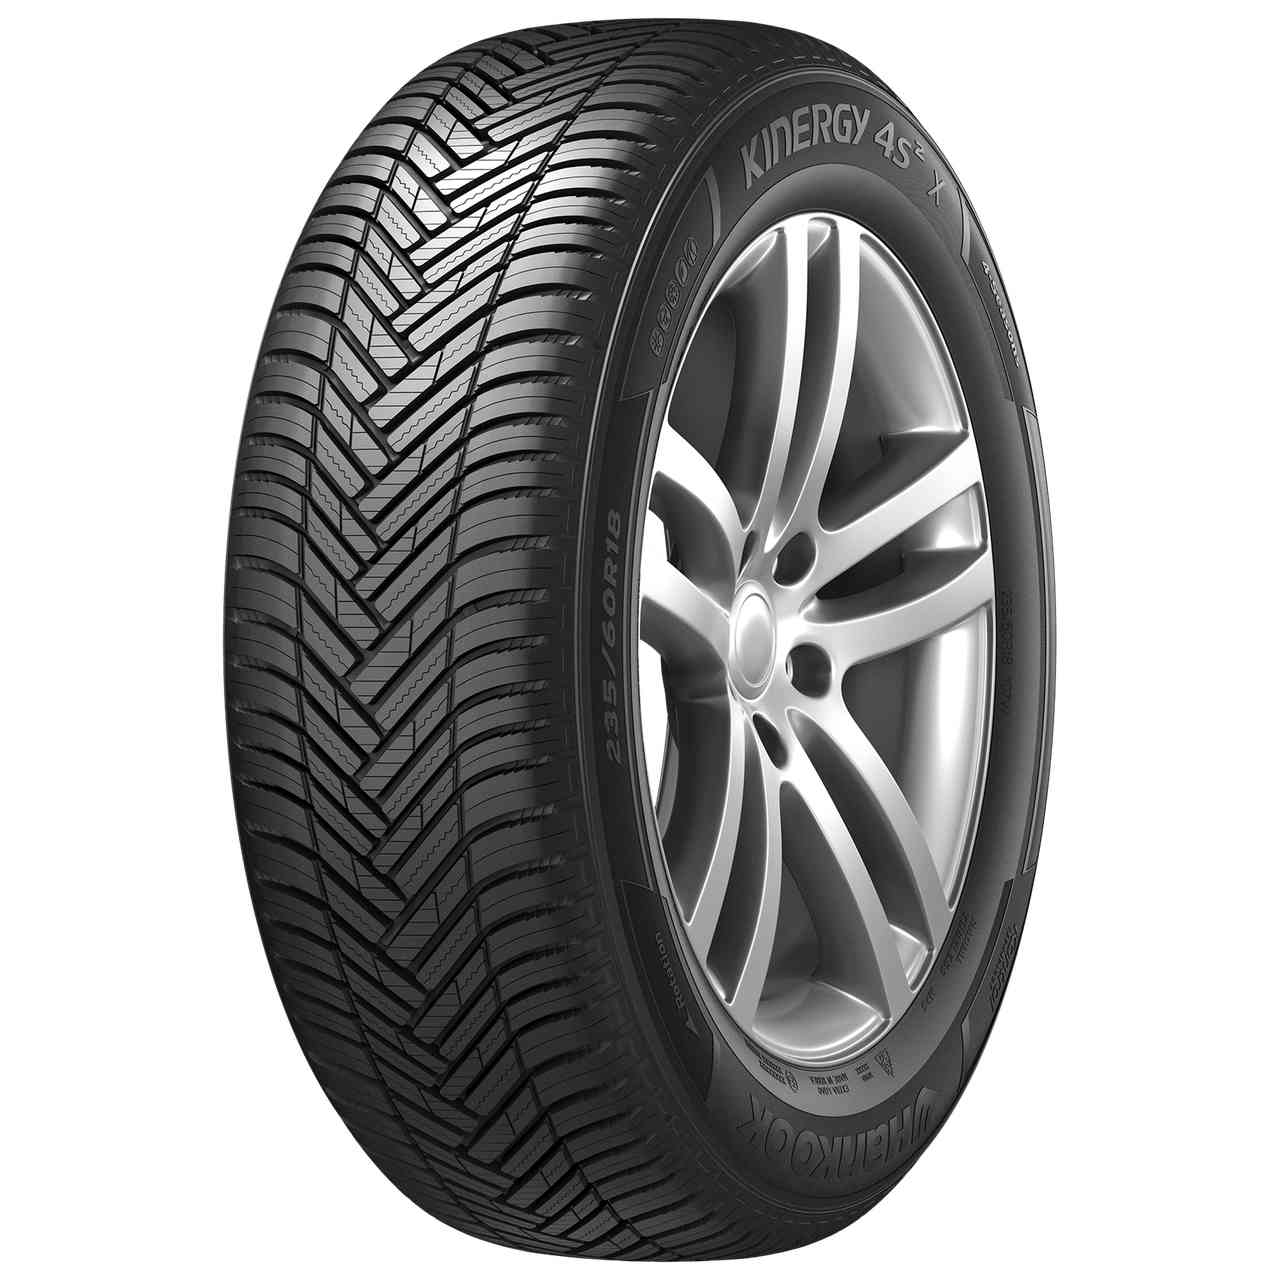 HANKOOK KINERGY 4S 2 X (H750A) 255/55ZR20 110Y BSW XL